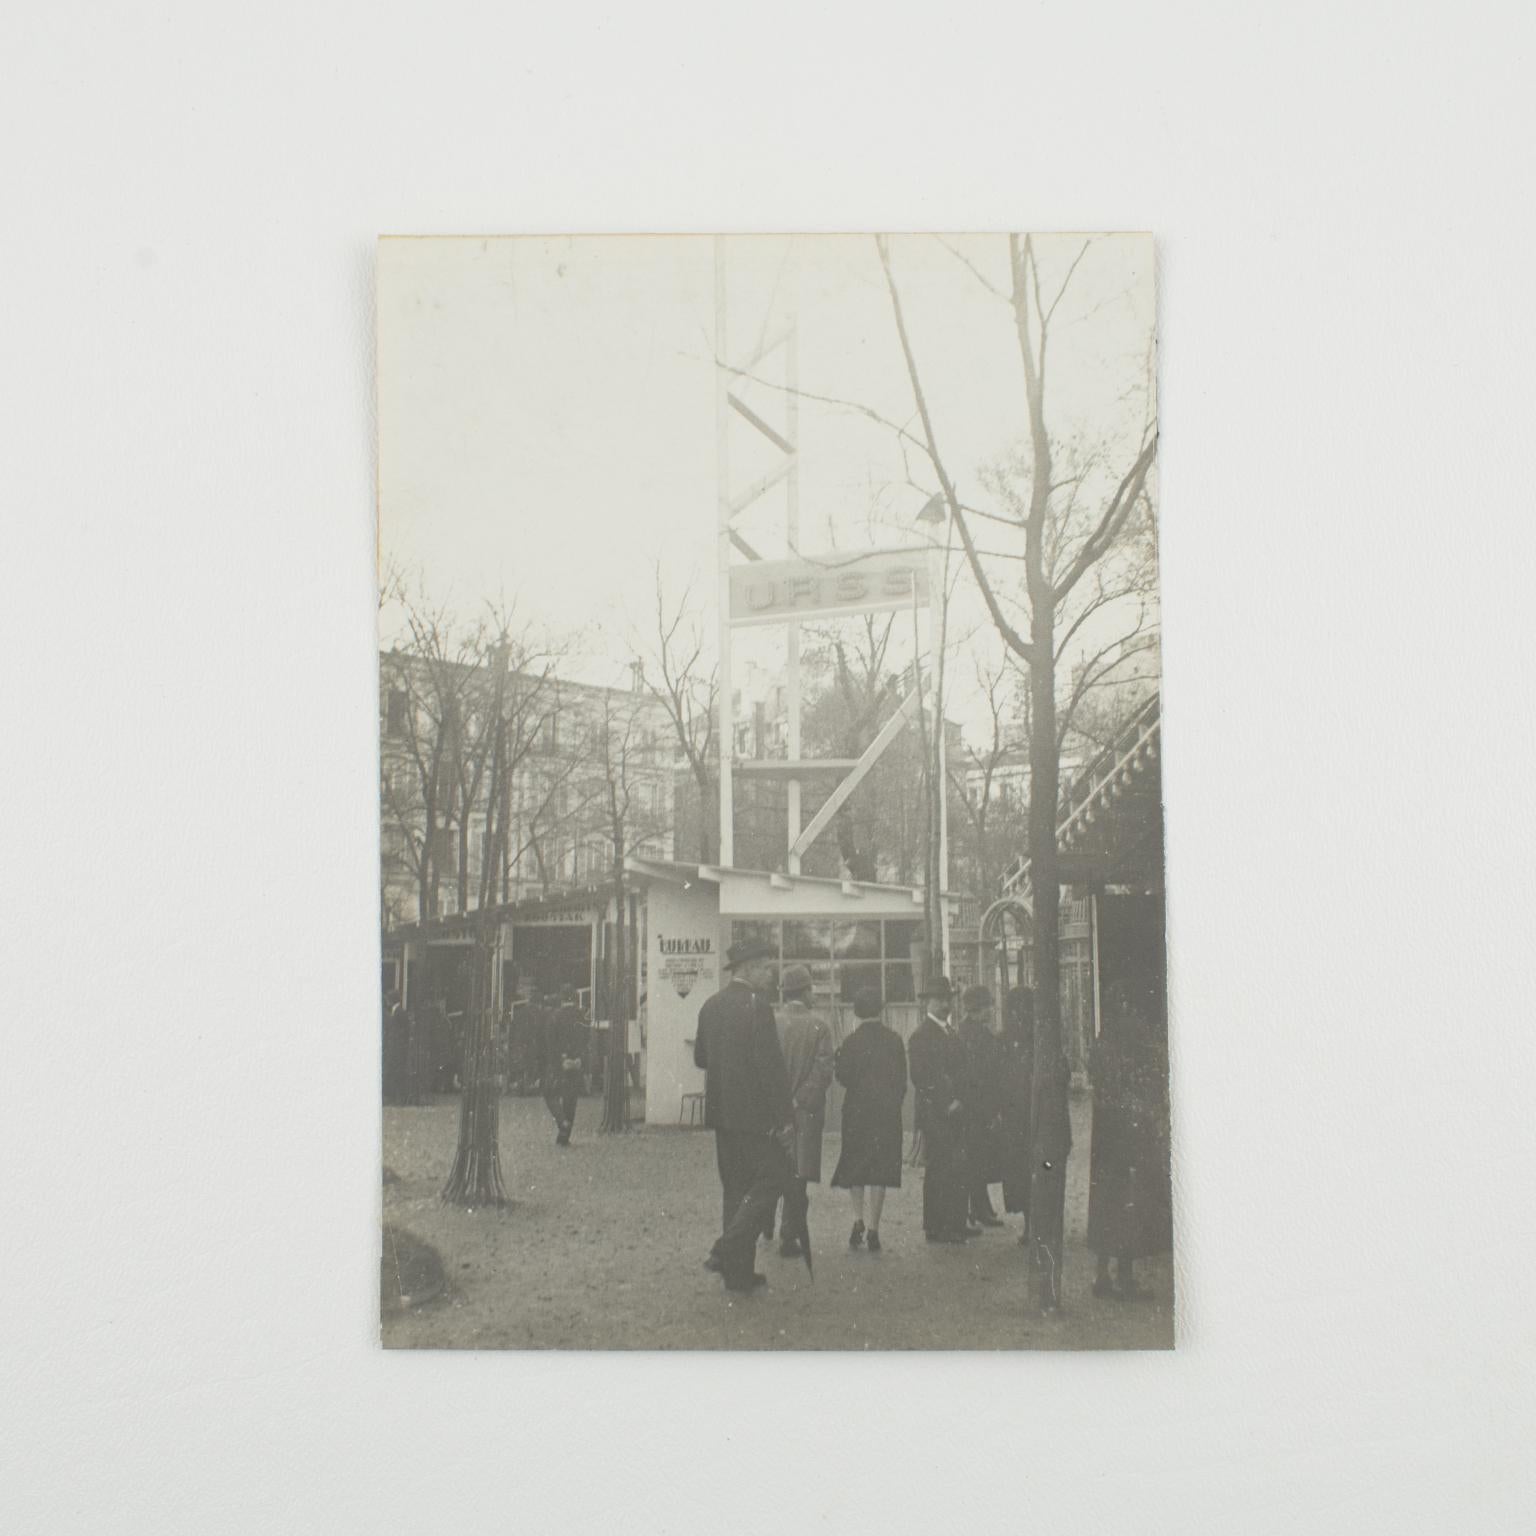 A unique original silver gelatin black and white photography.
The International Decorative Arts Exhibition in Paris, October 1925. The front entrance of the Russian Pavilion.
Features:
Original silver gelatin print photography unframed.
Press